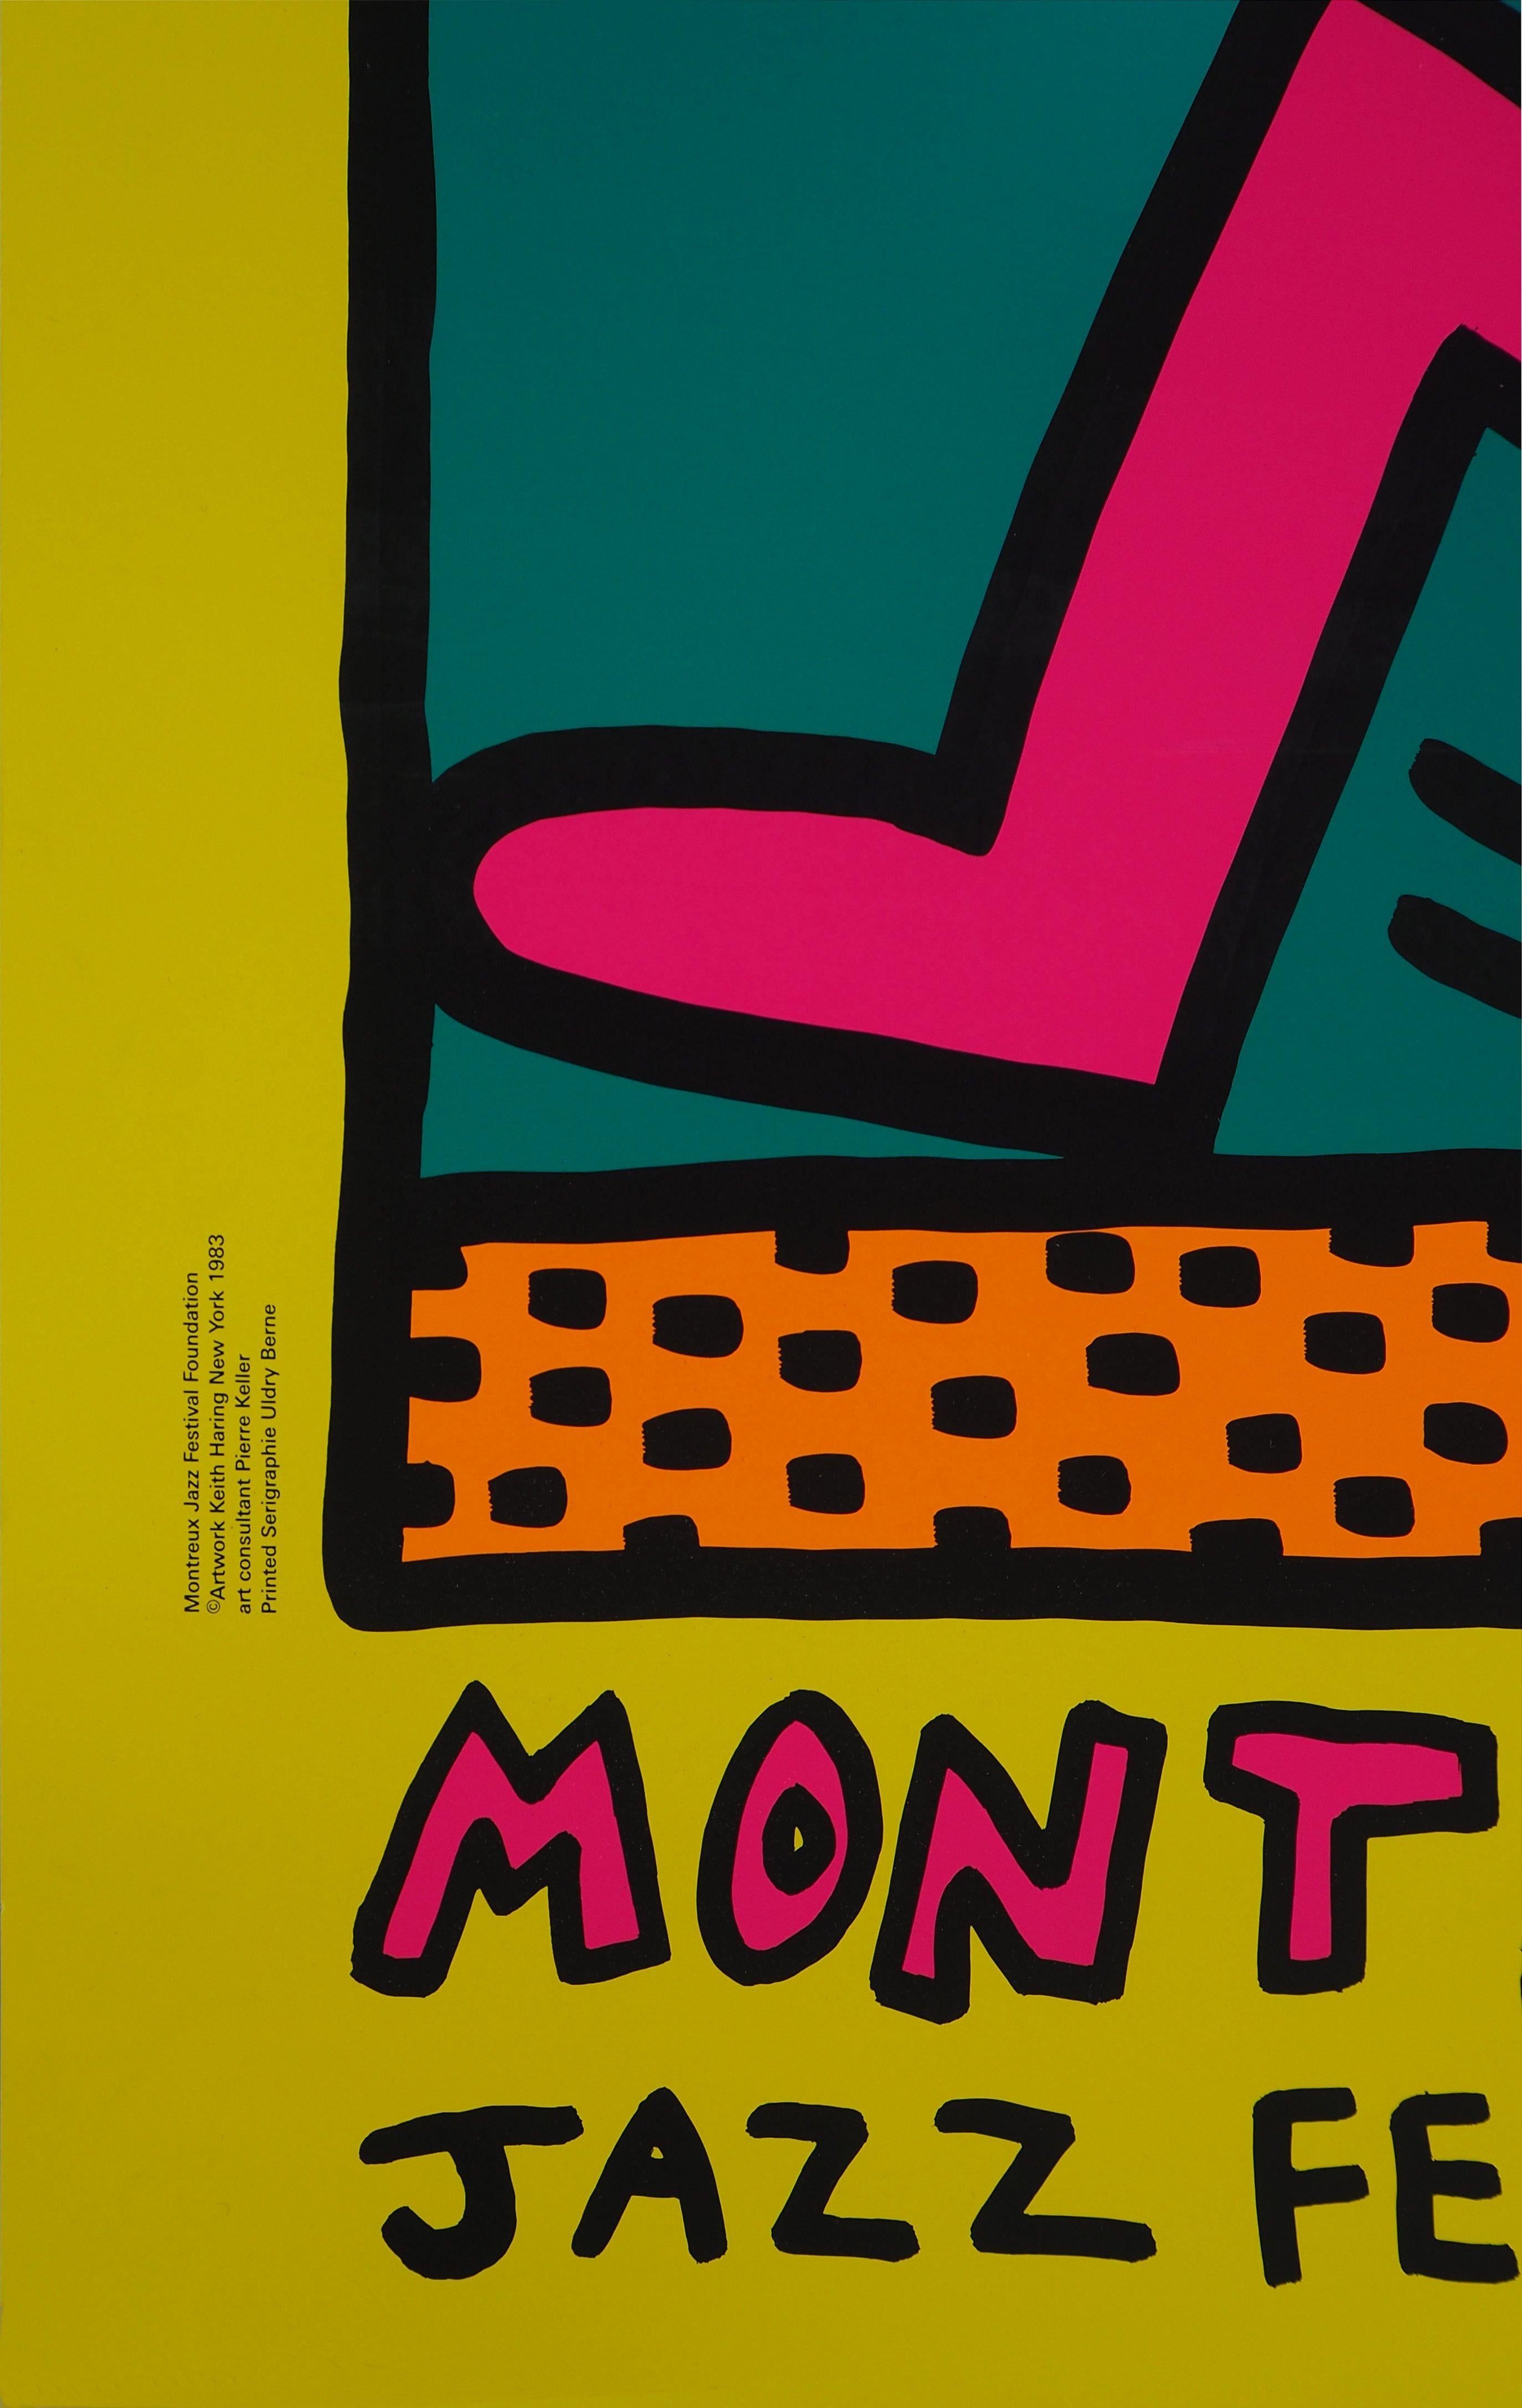 Jazz : Swing Guy (Yellow) - Vintage Screenprint Poster, Montreux, 1983 - Orange Figurative Print by (after) Keith Haring